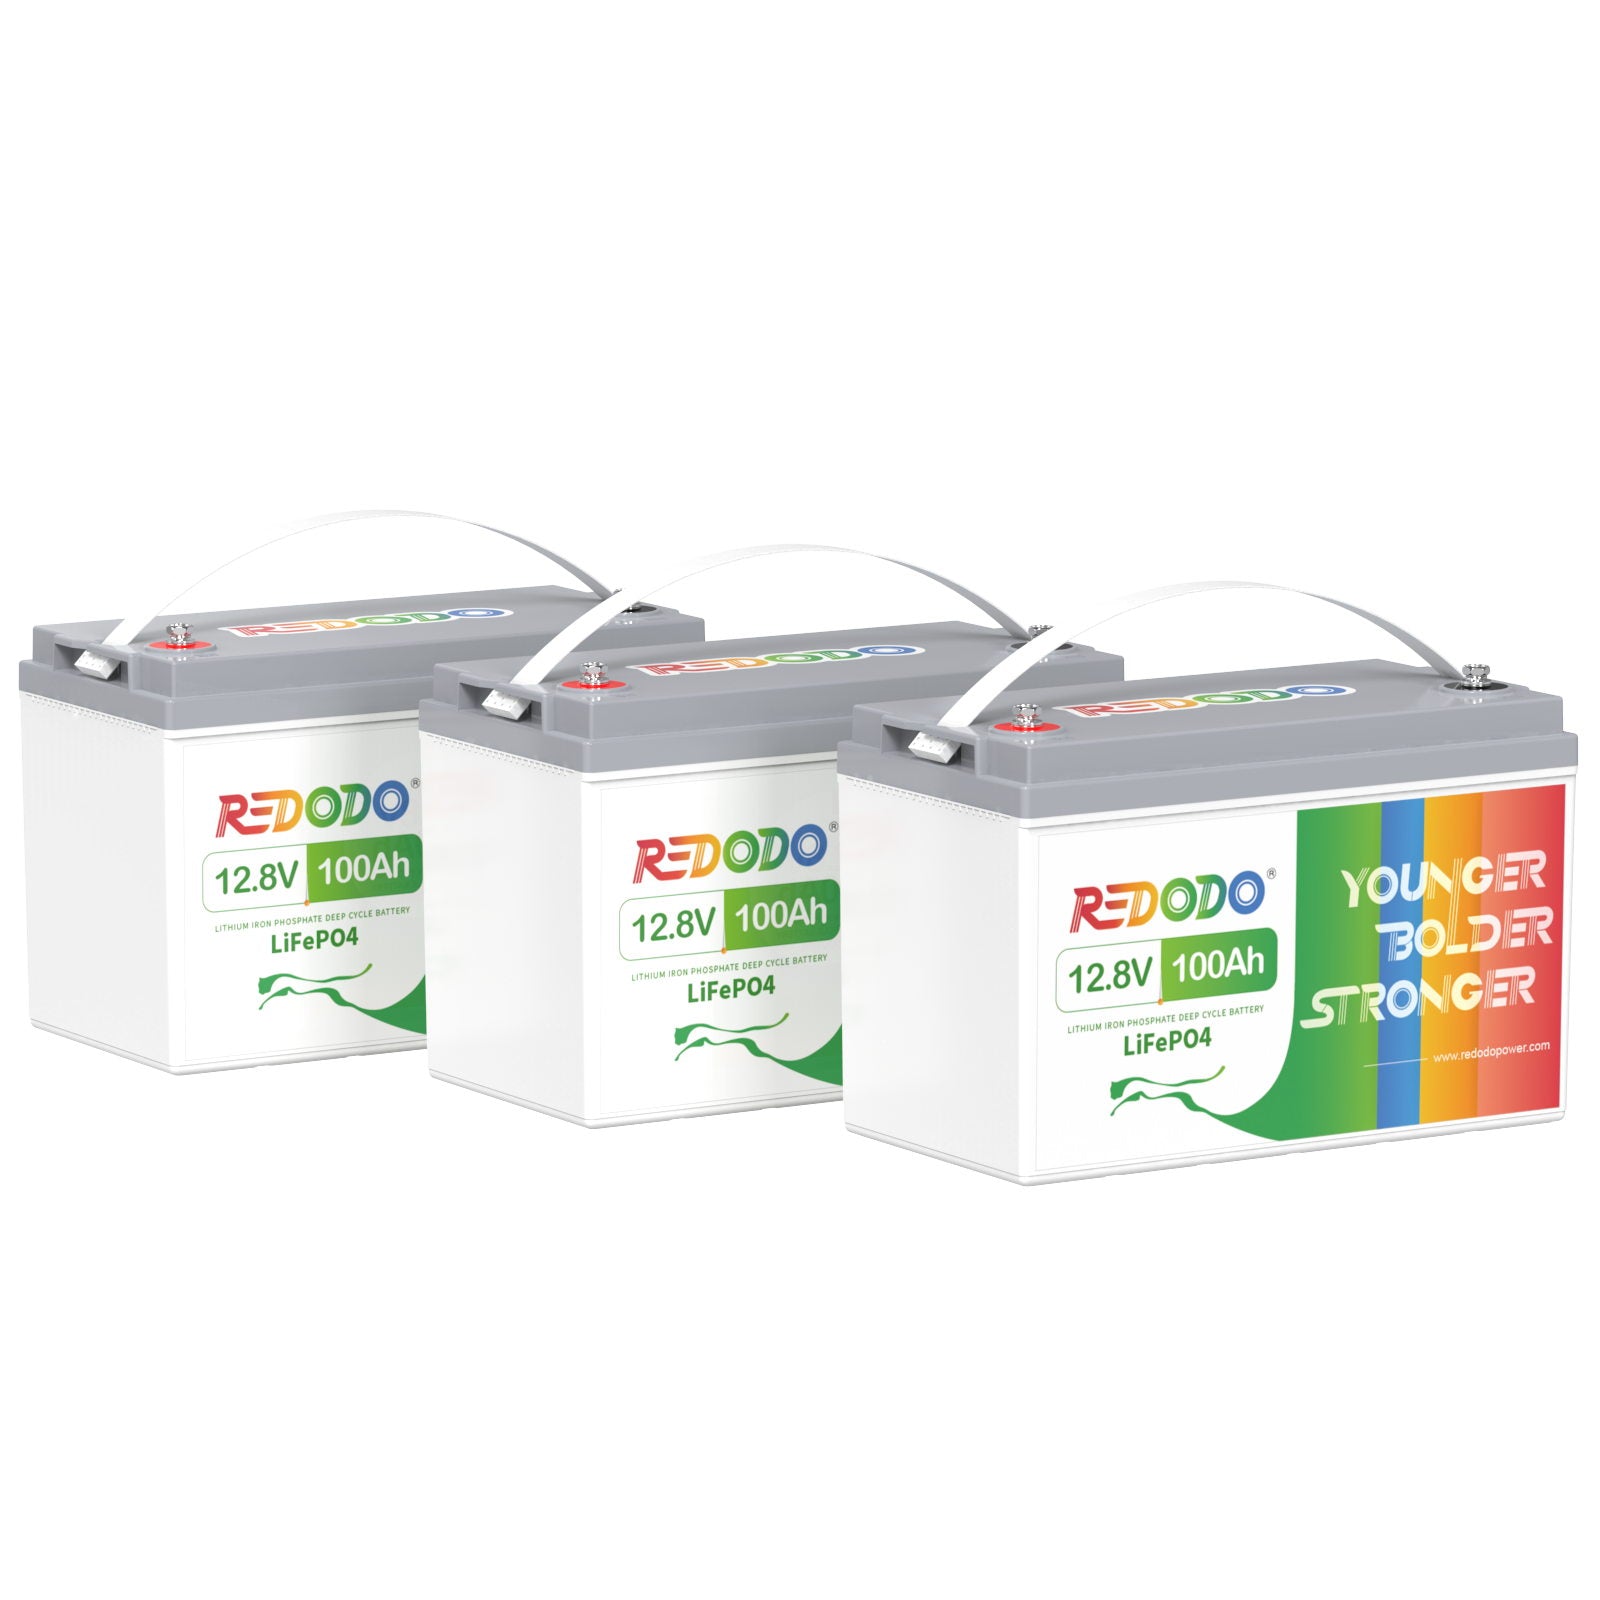 Redodo 12V 100Ah Lithium Battery, the most Affordable LiFePO4 Battery